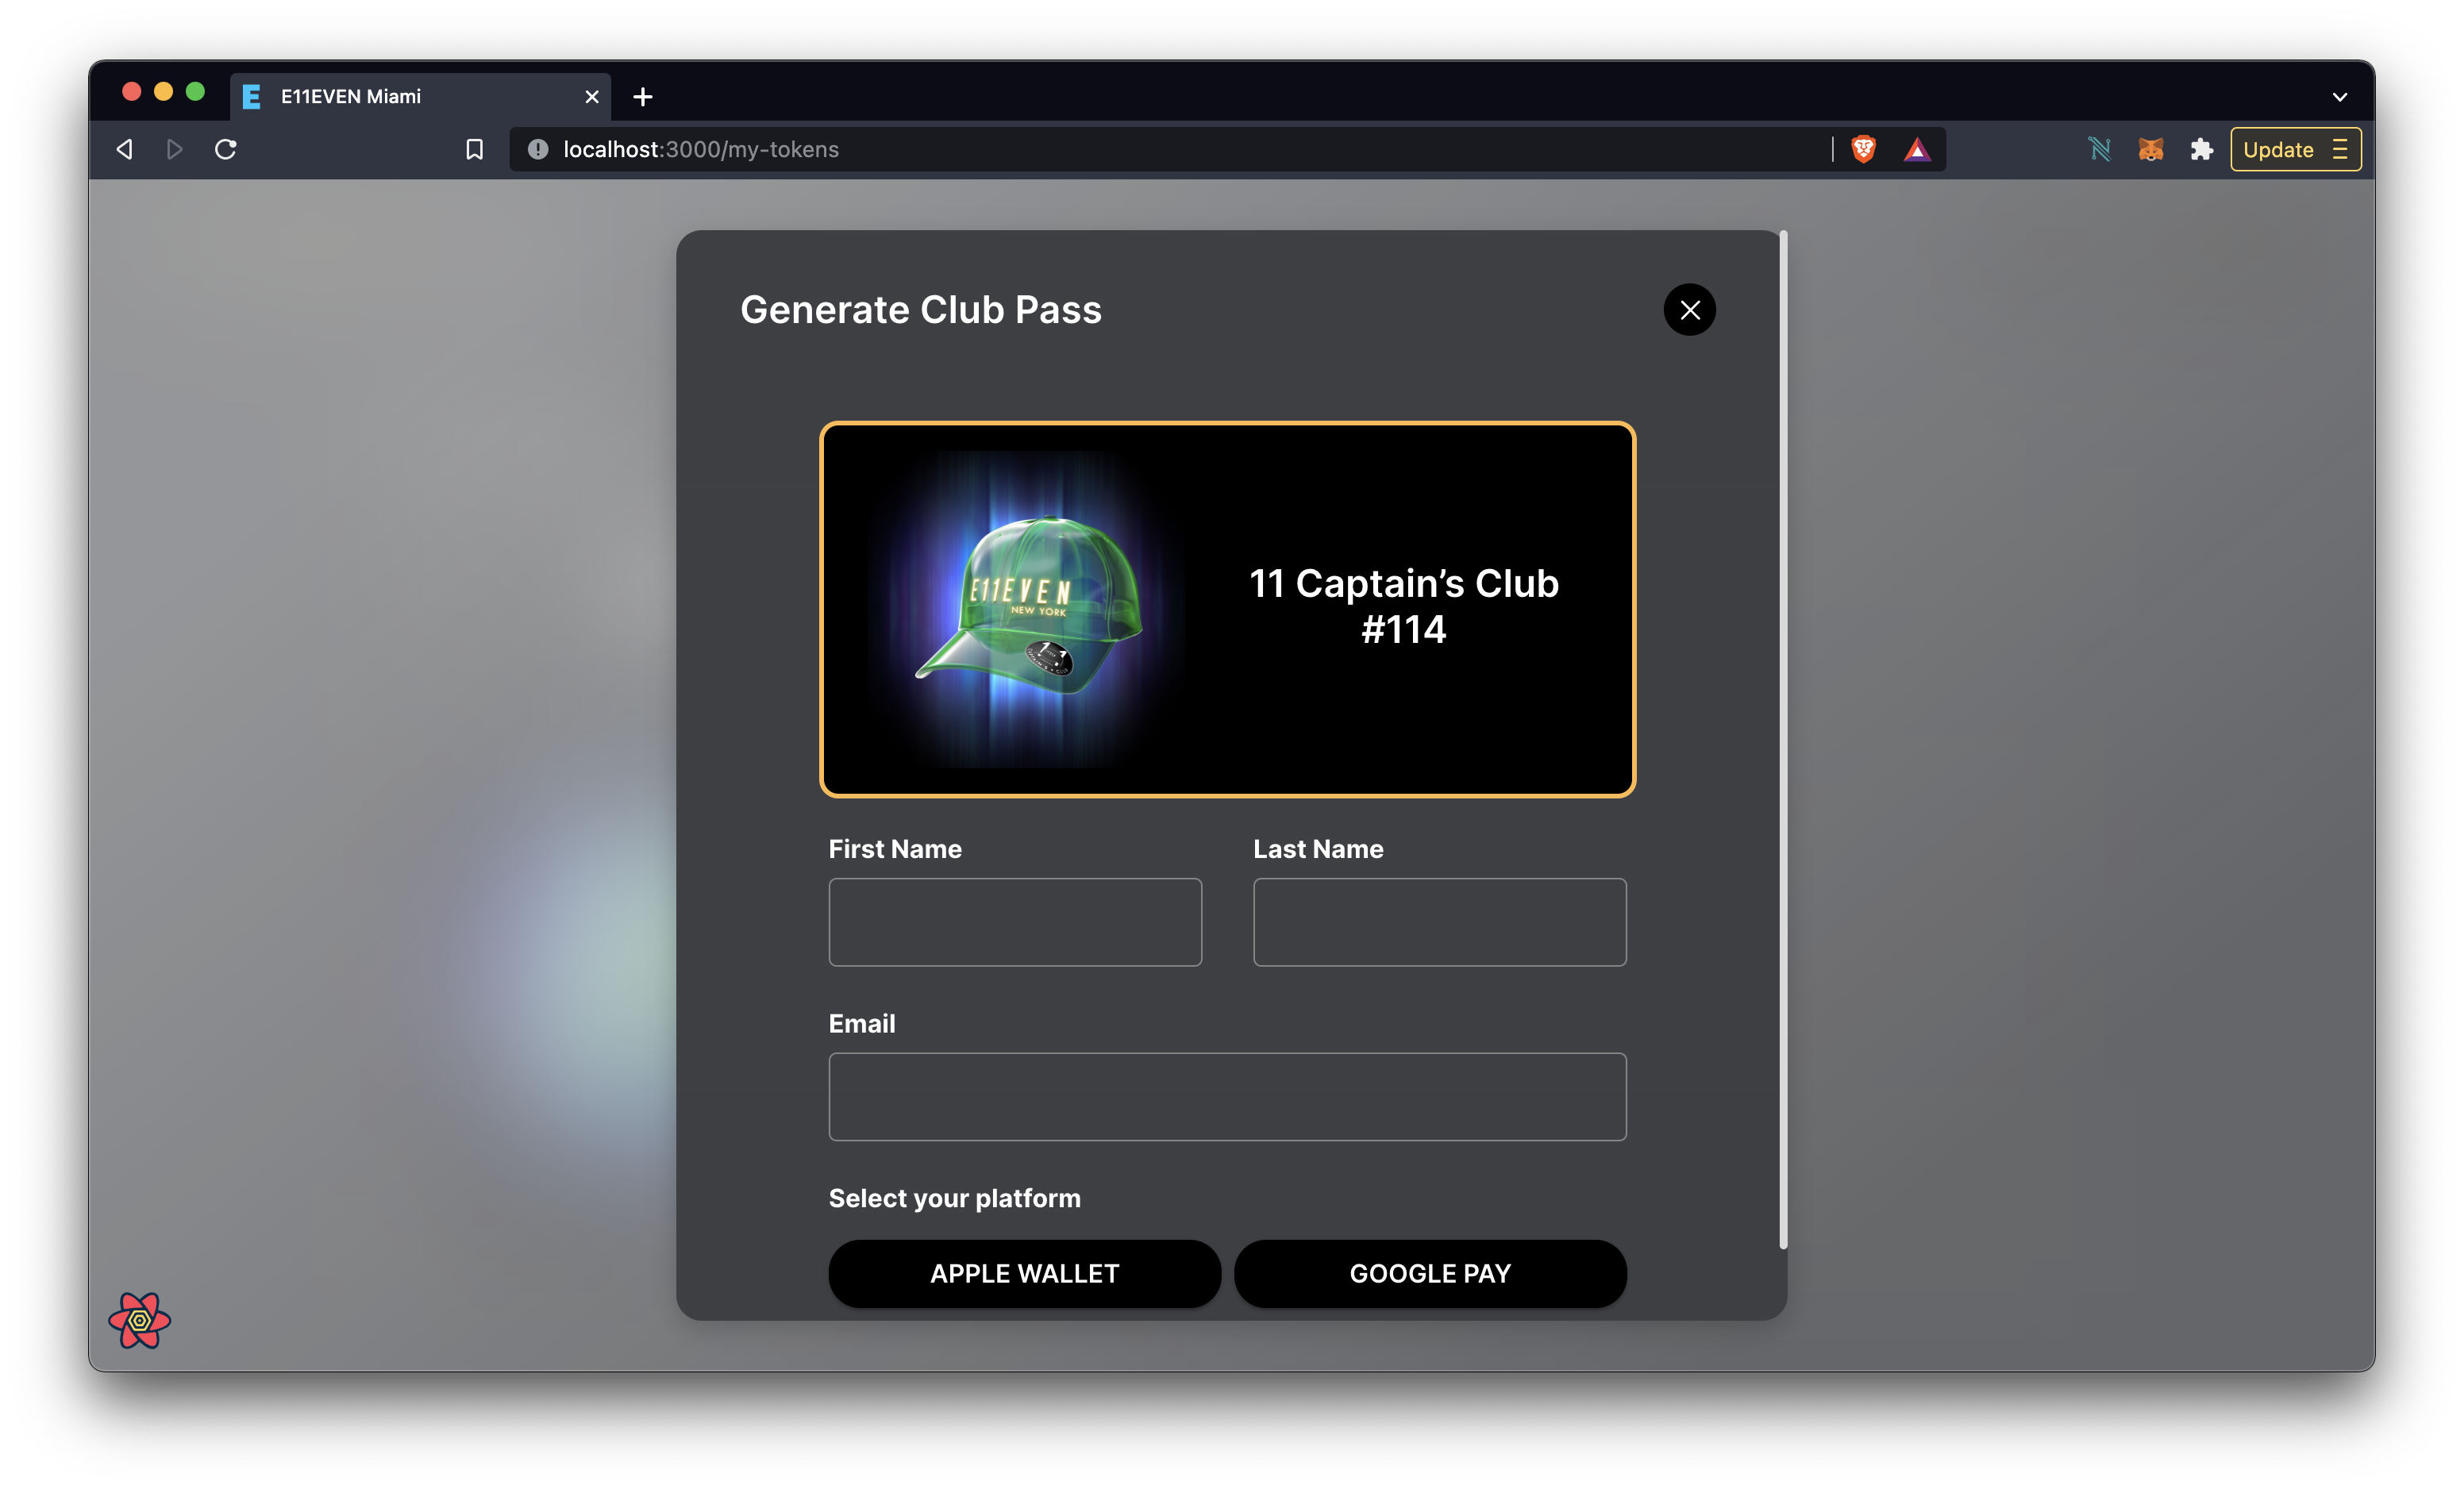 The Generate Club Pass Modal